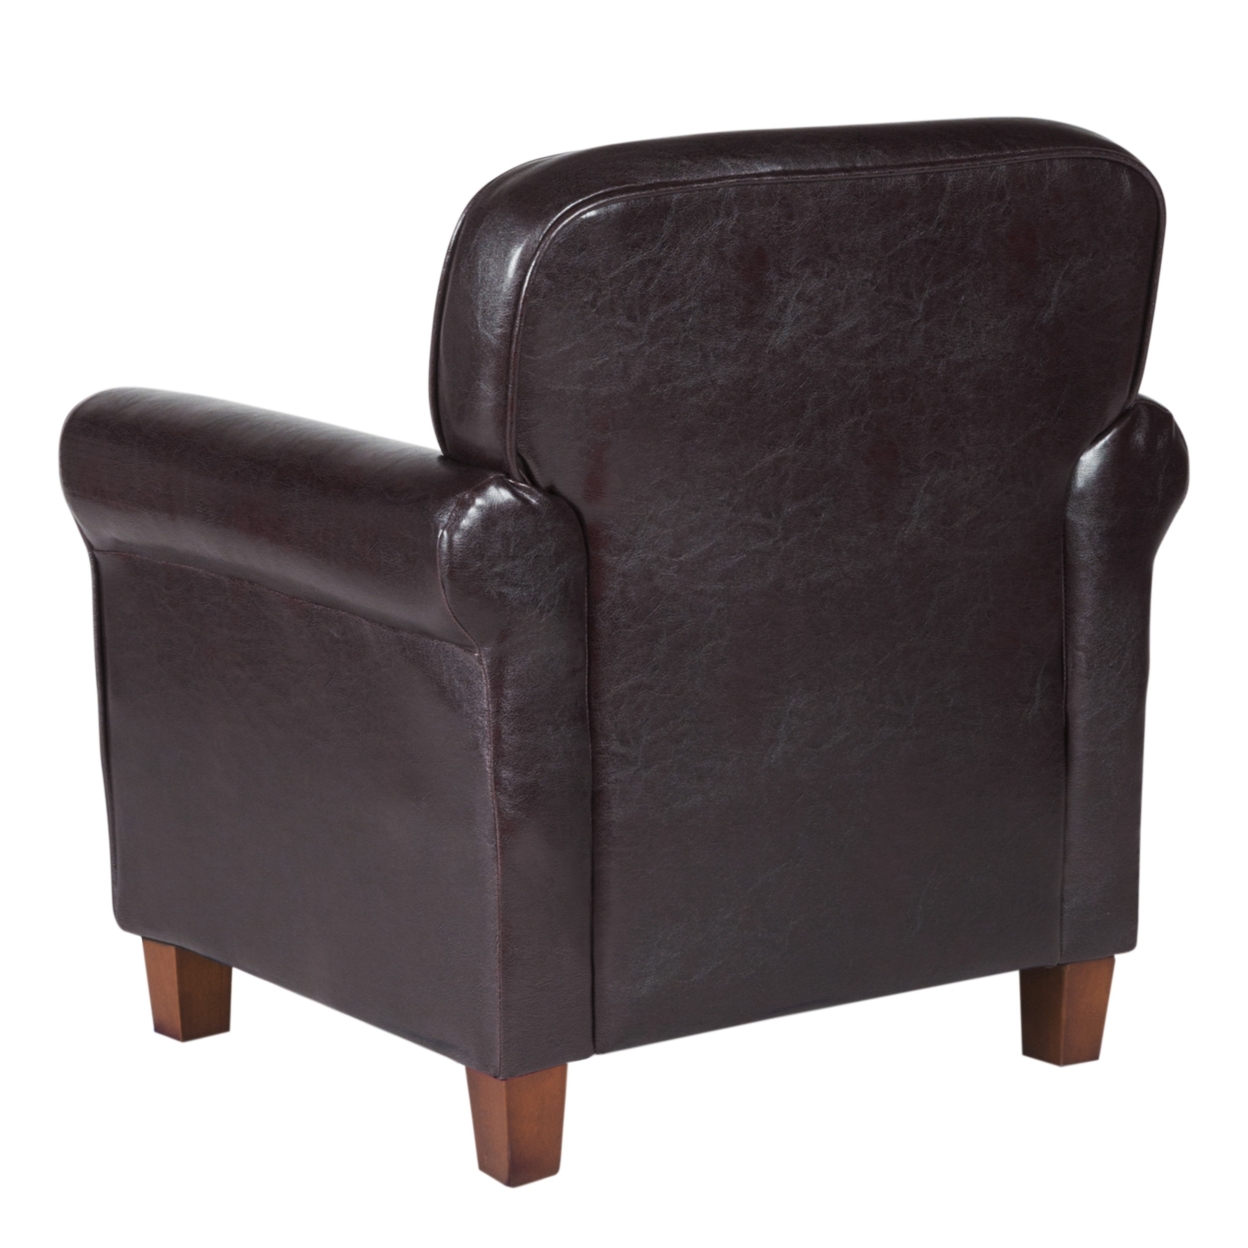 Faux Leather Upholstered Wooden Kids Accent Chair With Rolled Arms, Brown- Saltoro Sherpi